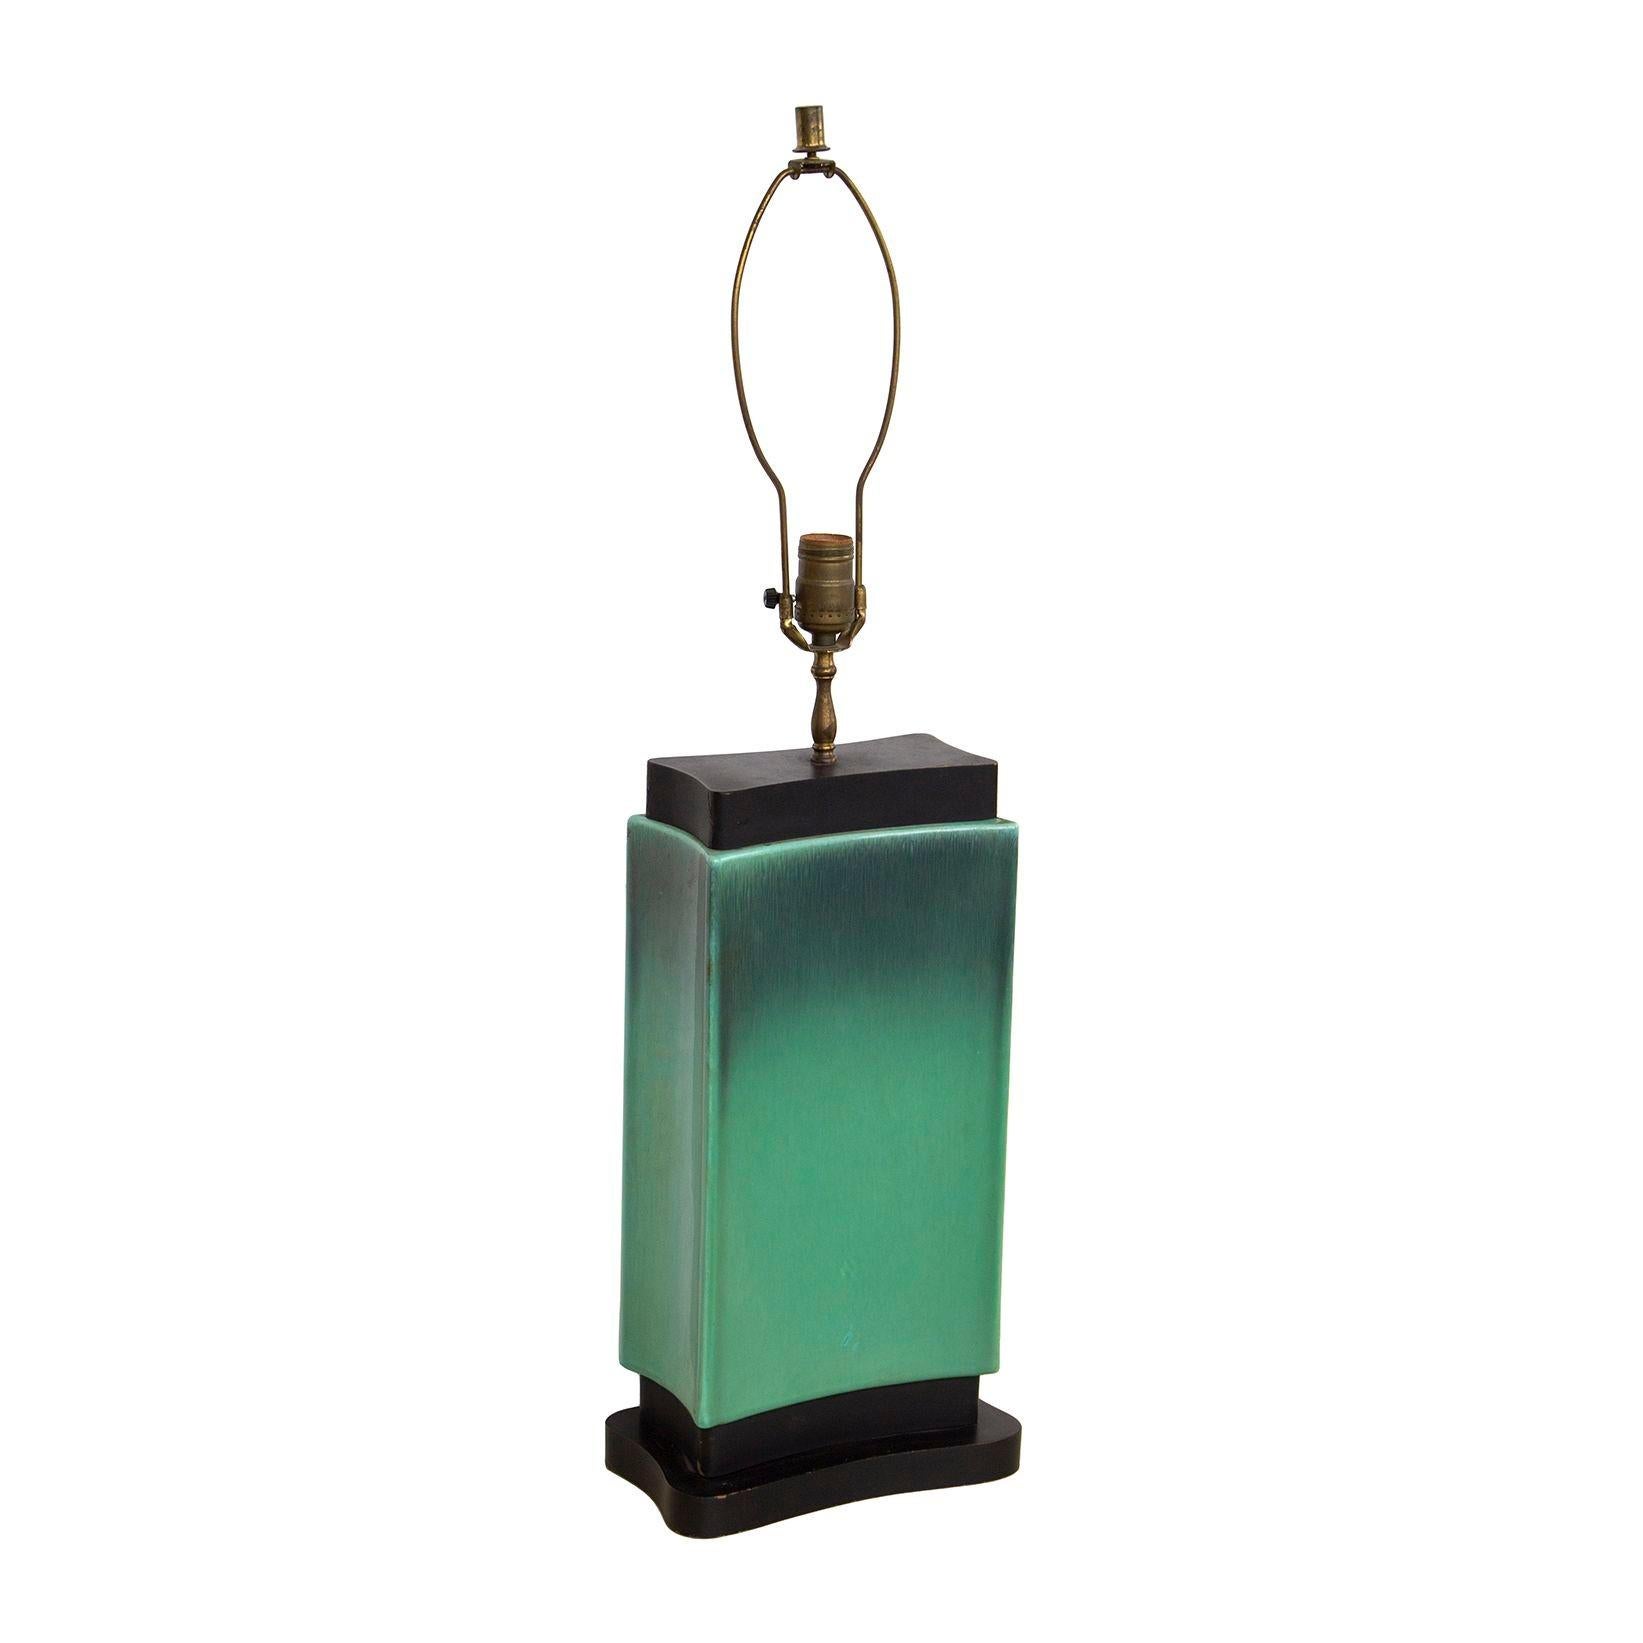 USA, 1940s
Beautiful and unusual art deco / midcentury modern table lamp in an ombre turquoise glaze with ebonized, curving wooden fittings. Lamp comes with original shade, which is in poor condition, but can be used for a model on the size and